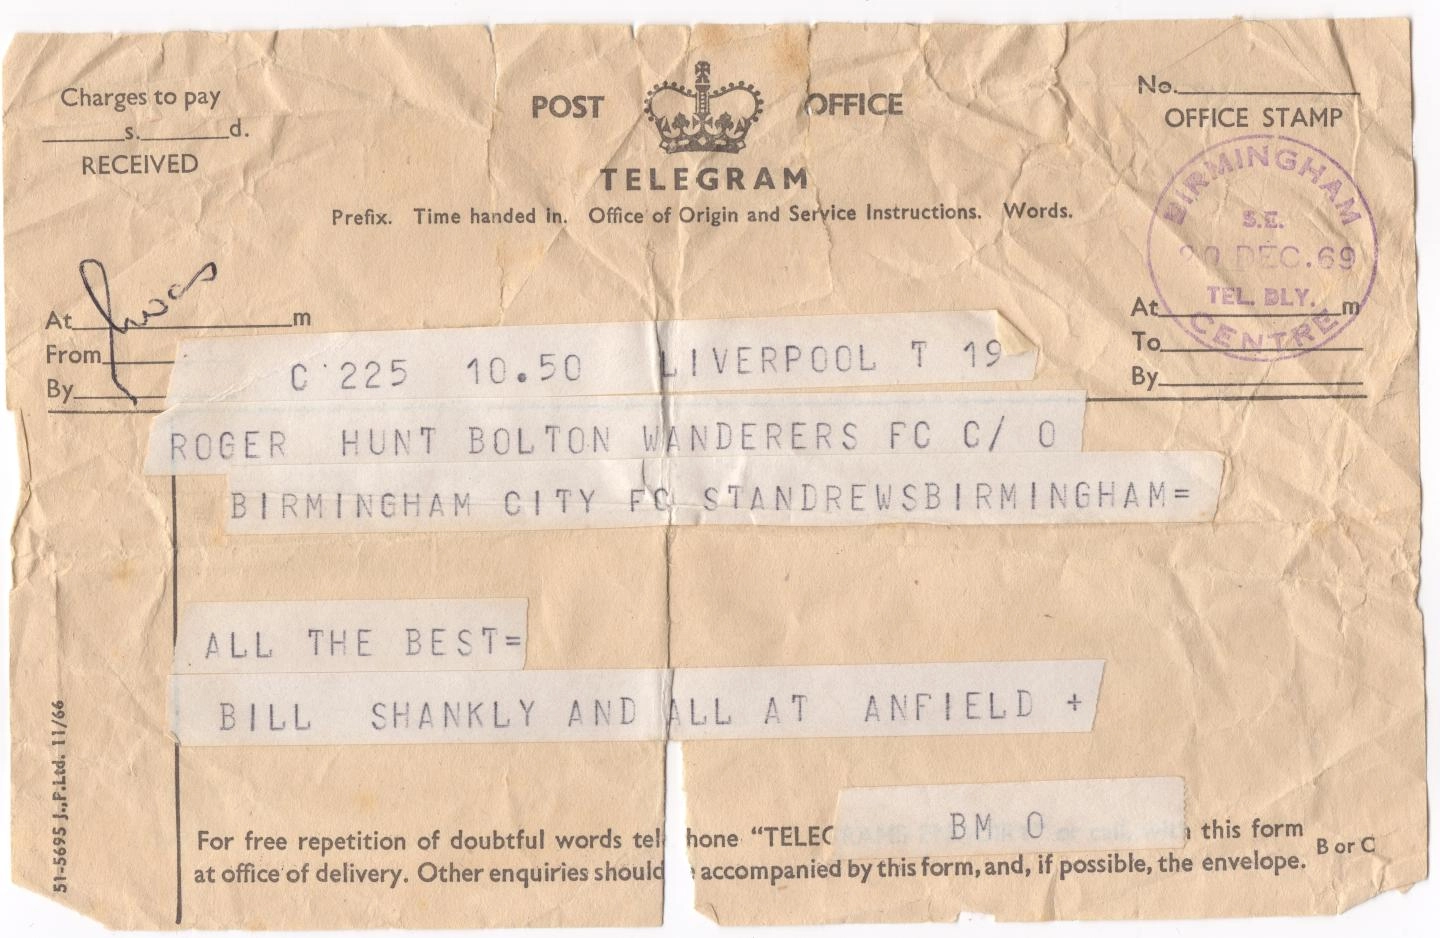 Roger's telegram from Bill Shankly following his Liverpool departure